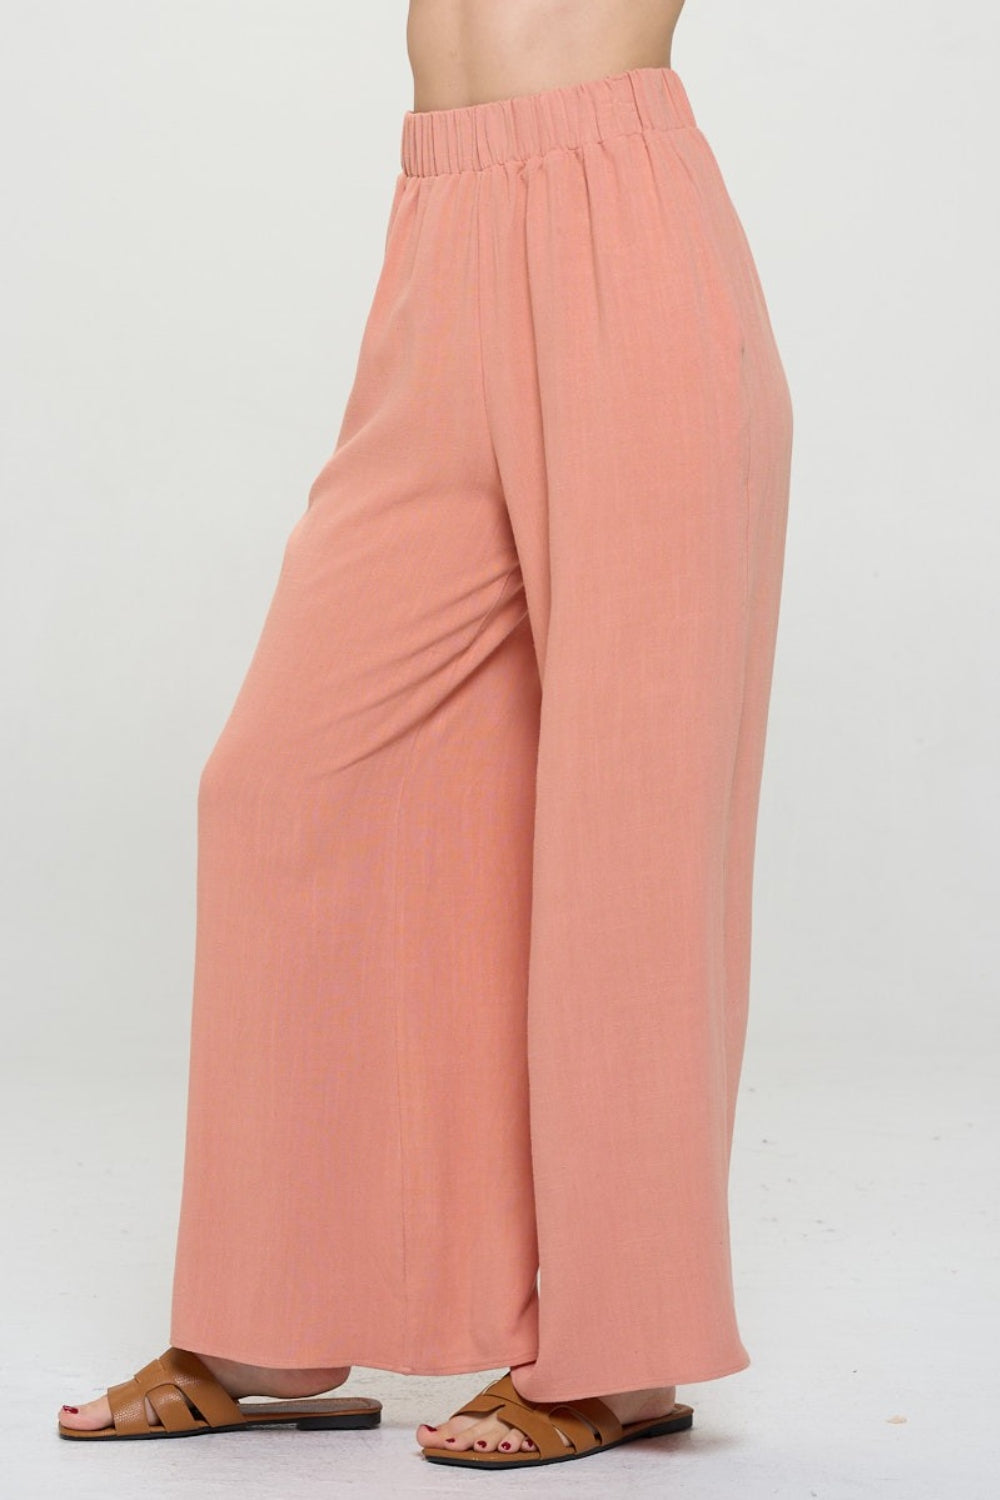 Linen Wide Leg Pants with Pockets for Women | Pants | Ro + Ivy